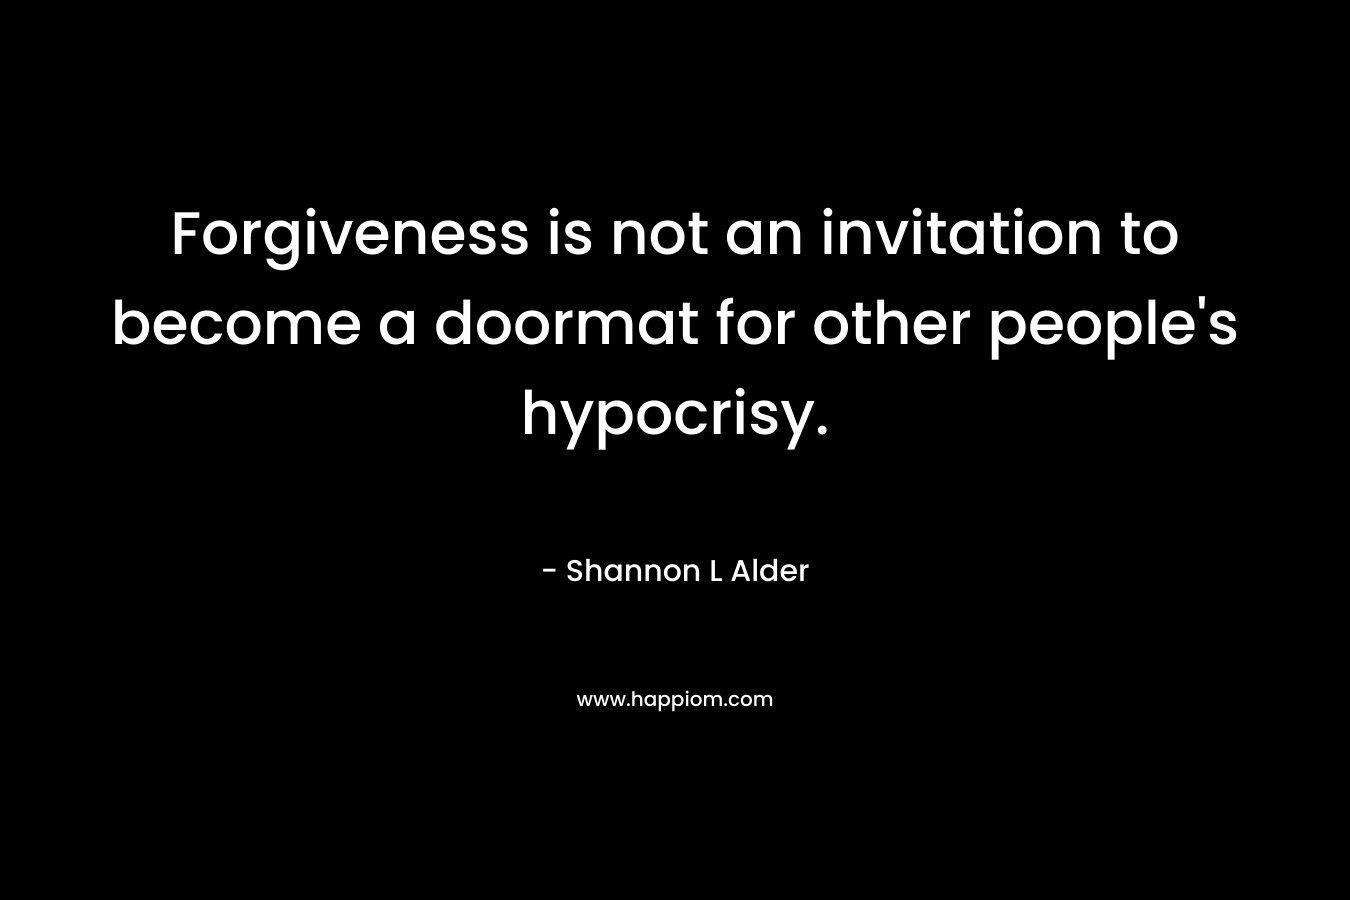 Forgiveness is not an invitation to become a doormat for other people's hypocrisy.